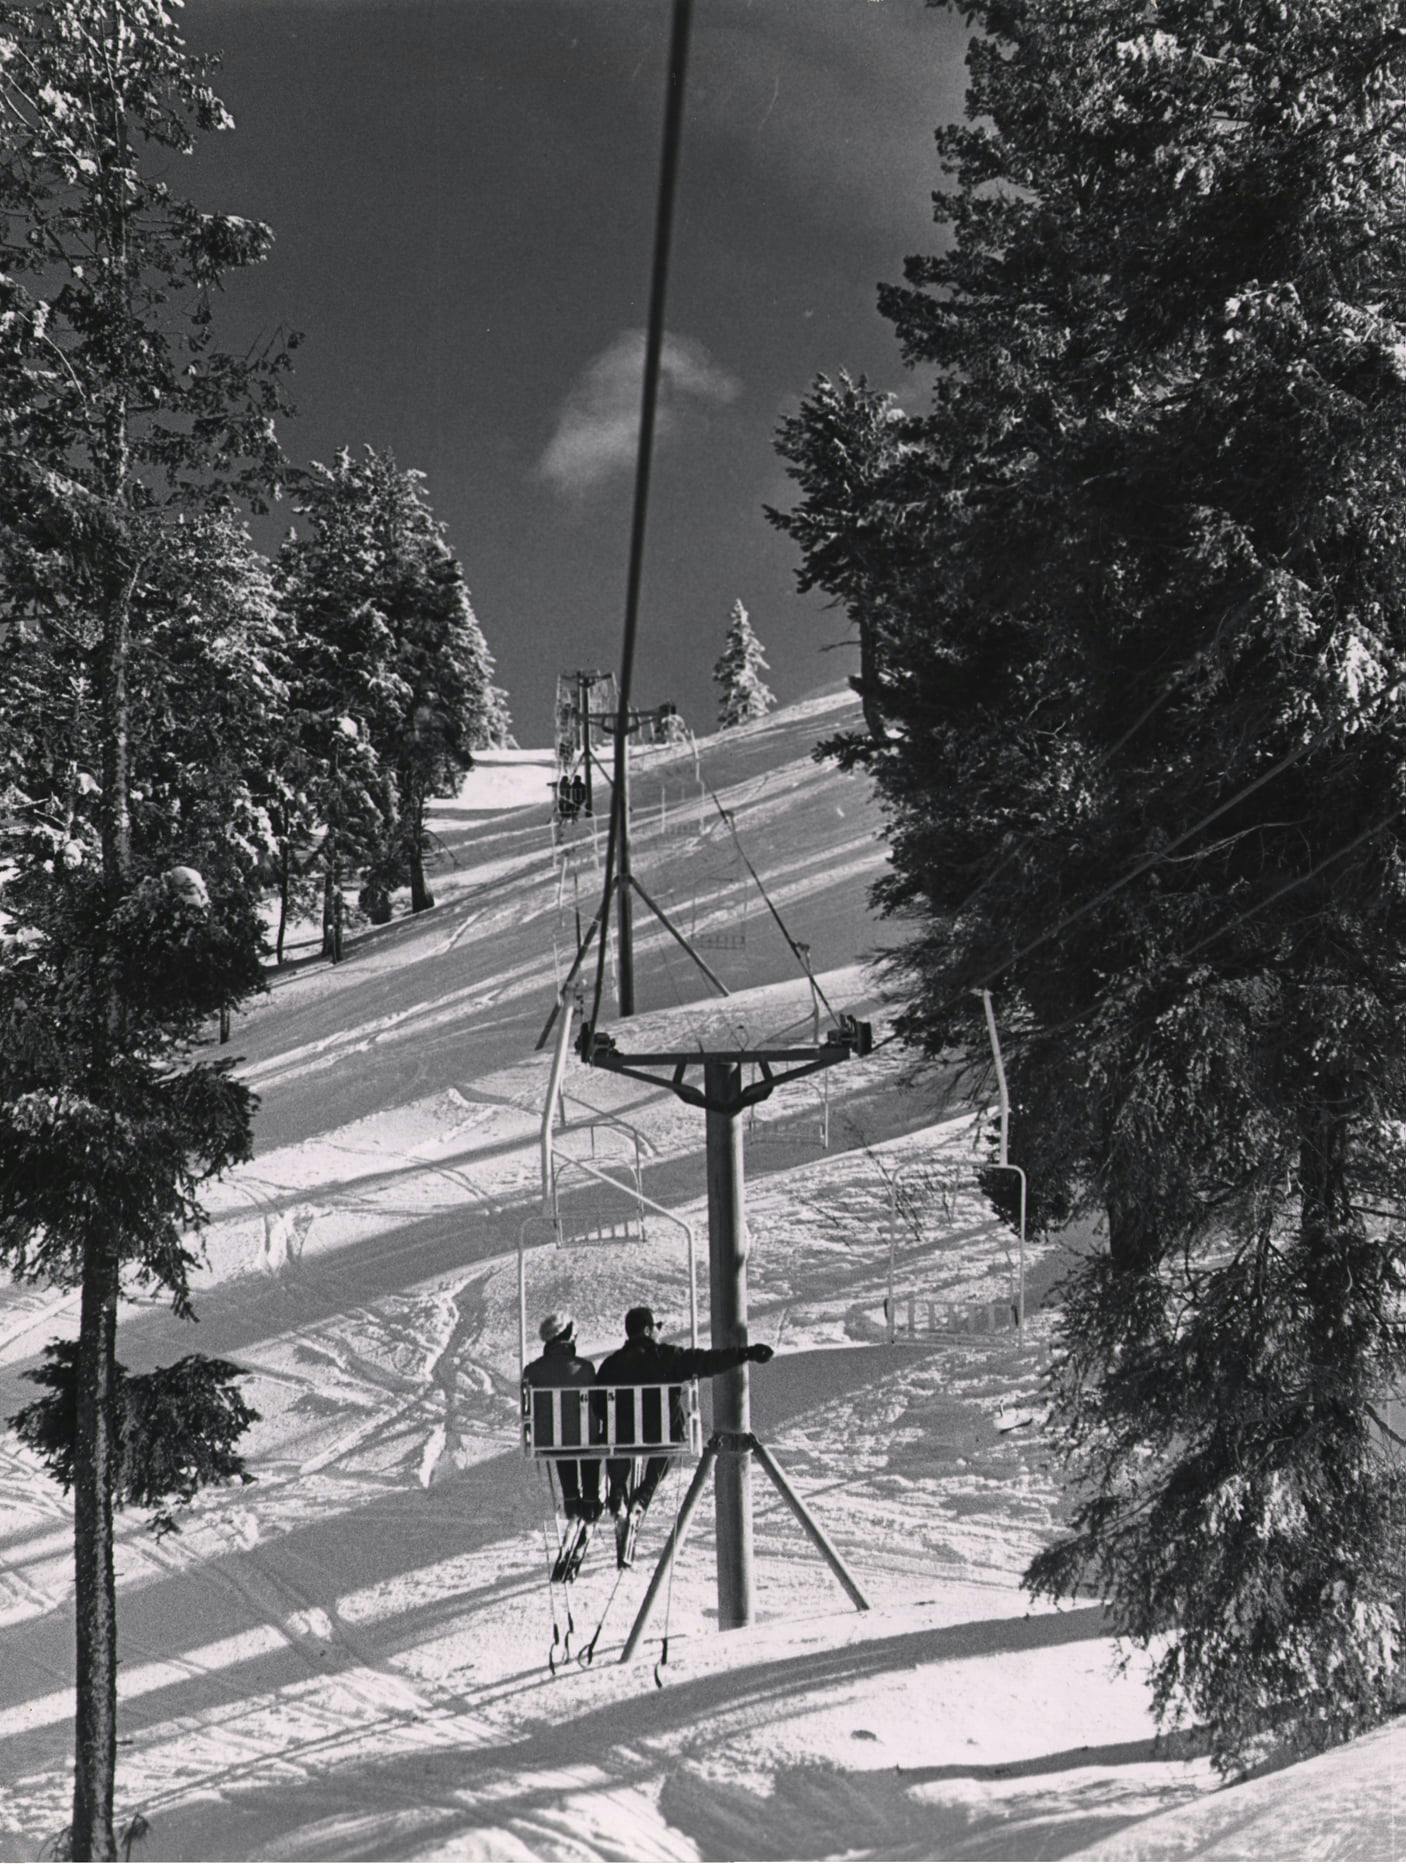 The history of Bogus Basin